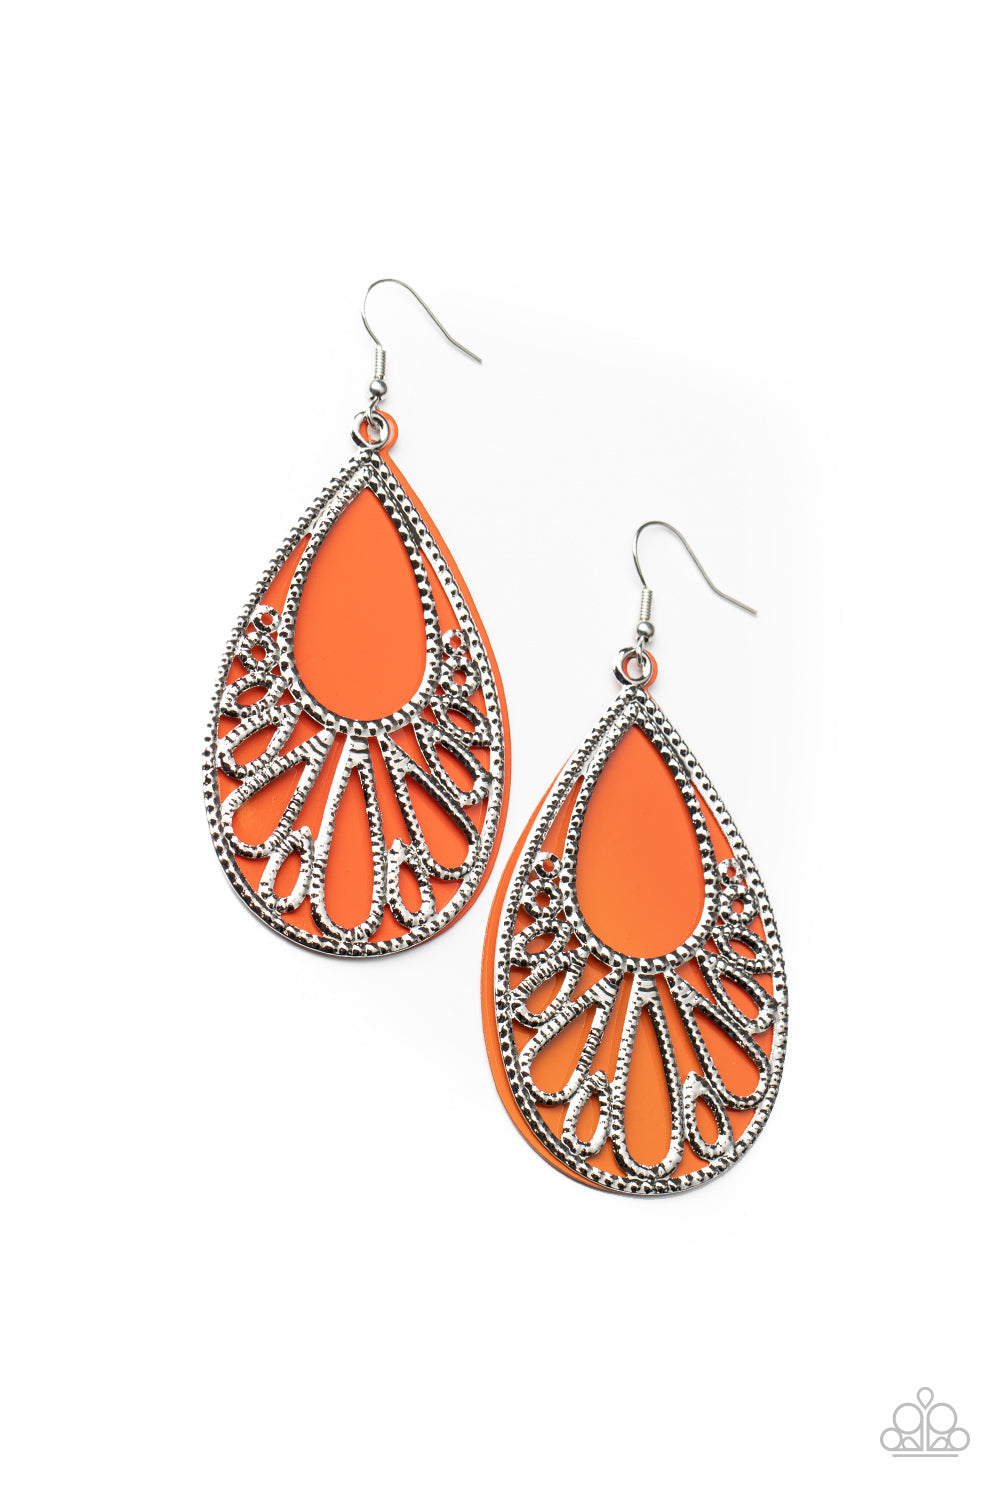 &lt;P&gt;Stenciled with studded filigree, an airy silver teardrop overlaps atop an orange acrylic teardrop frame, creating a flamboyant lure. Earring attaches to a standard fishhook fitting.
 &lt;/P&gt;  

&lt;P&gt; &lt;I&gt;  Sold as one pair of earrings. &lt;/I&gt;  &lt;/P&gt;


&lt;img src=\&quot;https://d9b54x484lq62.cloudfront.net/paparazzi/shopping/images/517_tag150x115_1.png\&quot; alt=\&quot;New Kit\&quot; align=\&quot;middle\&quot; height=\&quot;50\&quot; width=\&quot;50\&quot;/&gt;